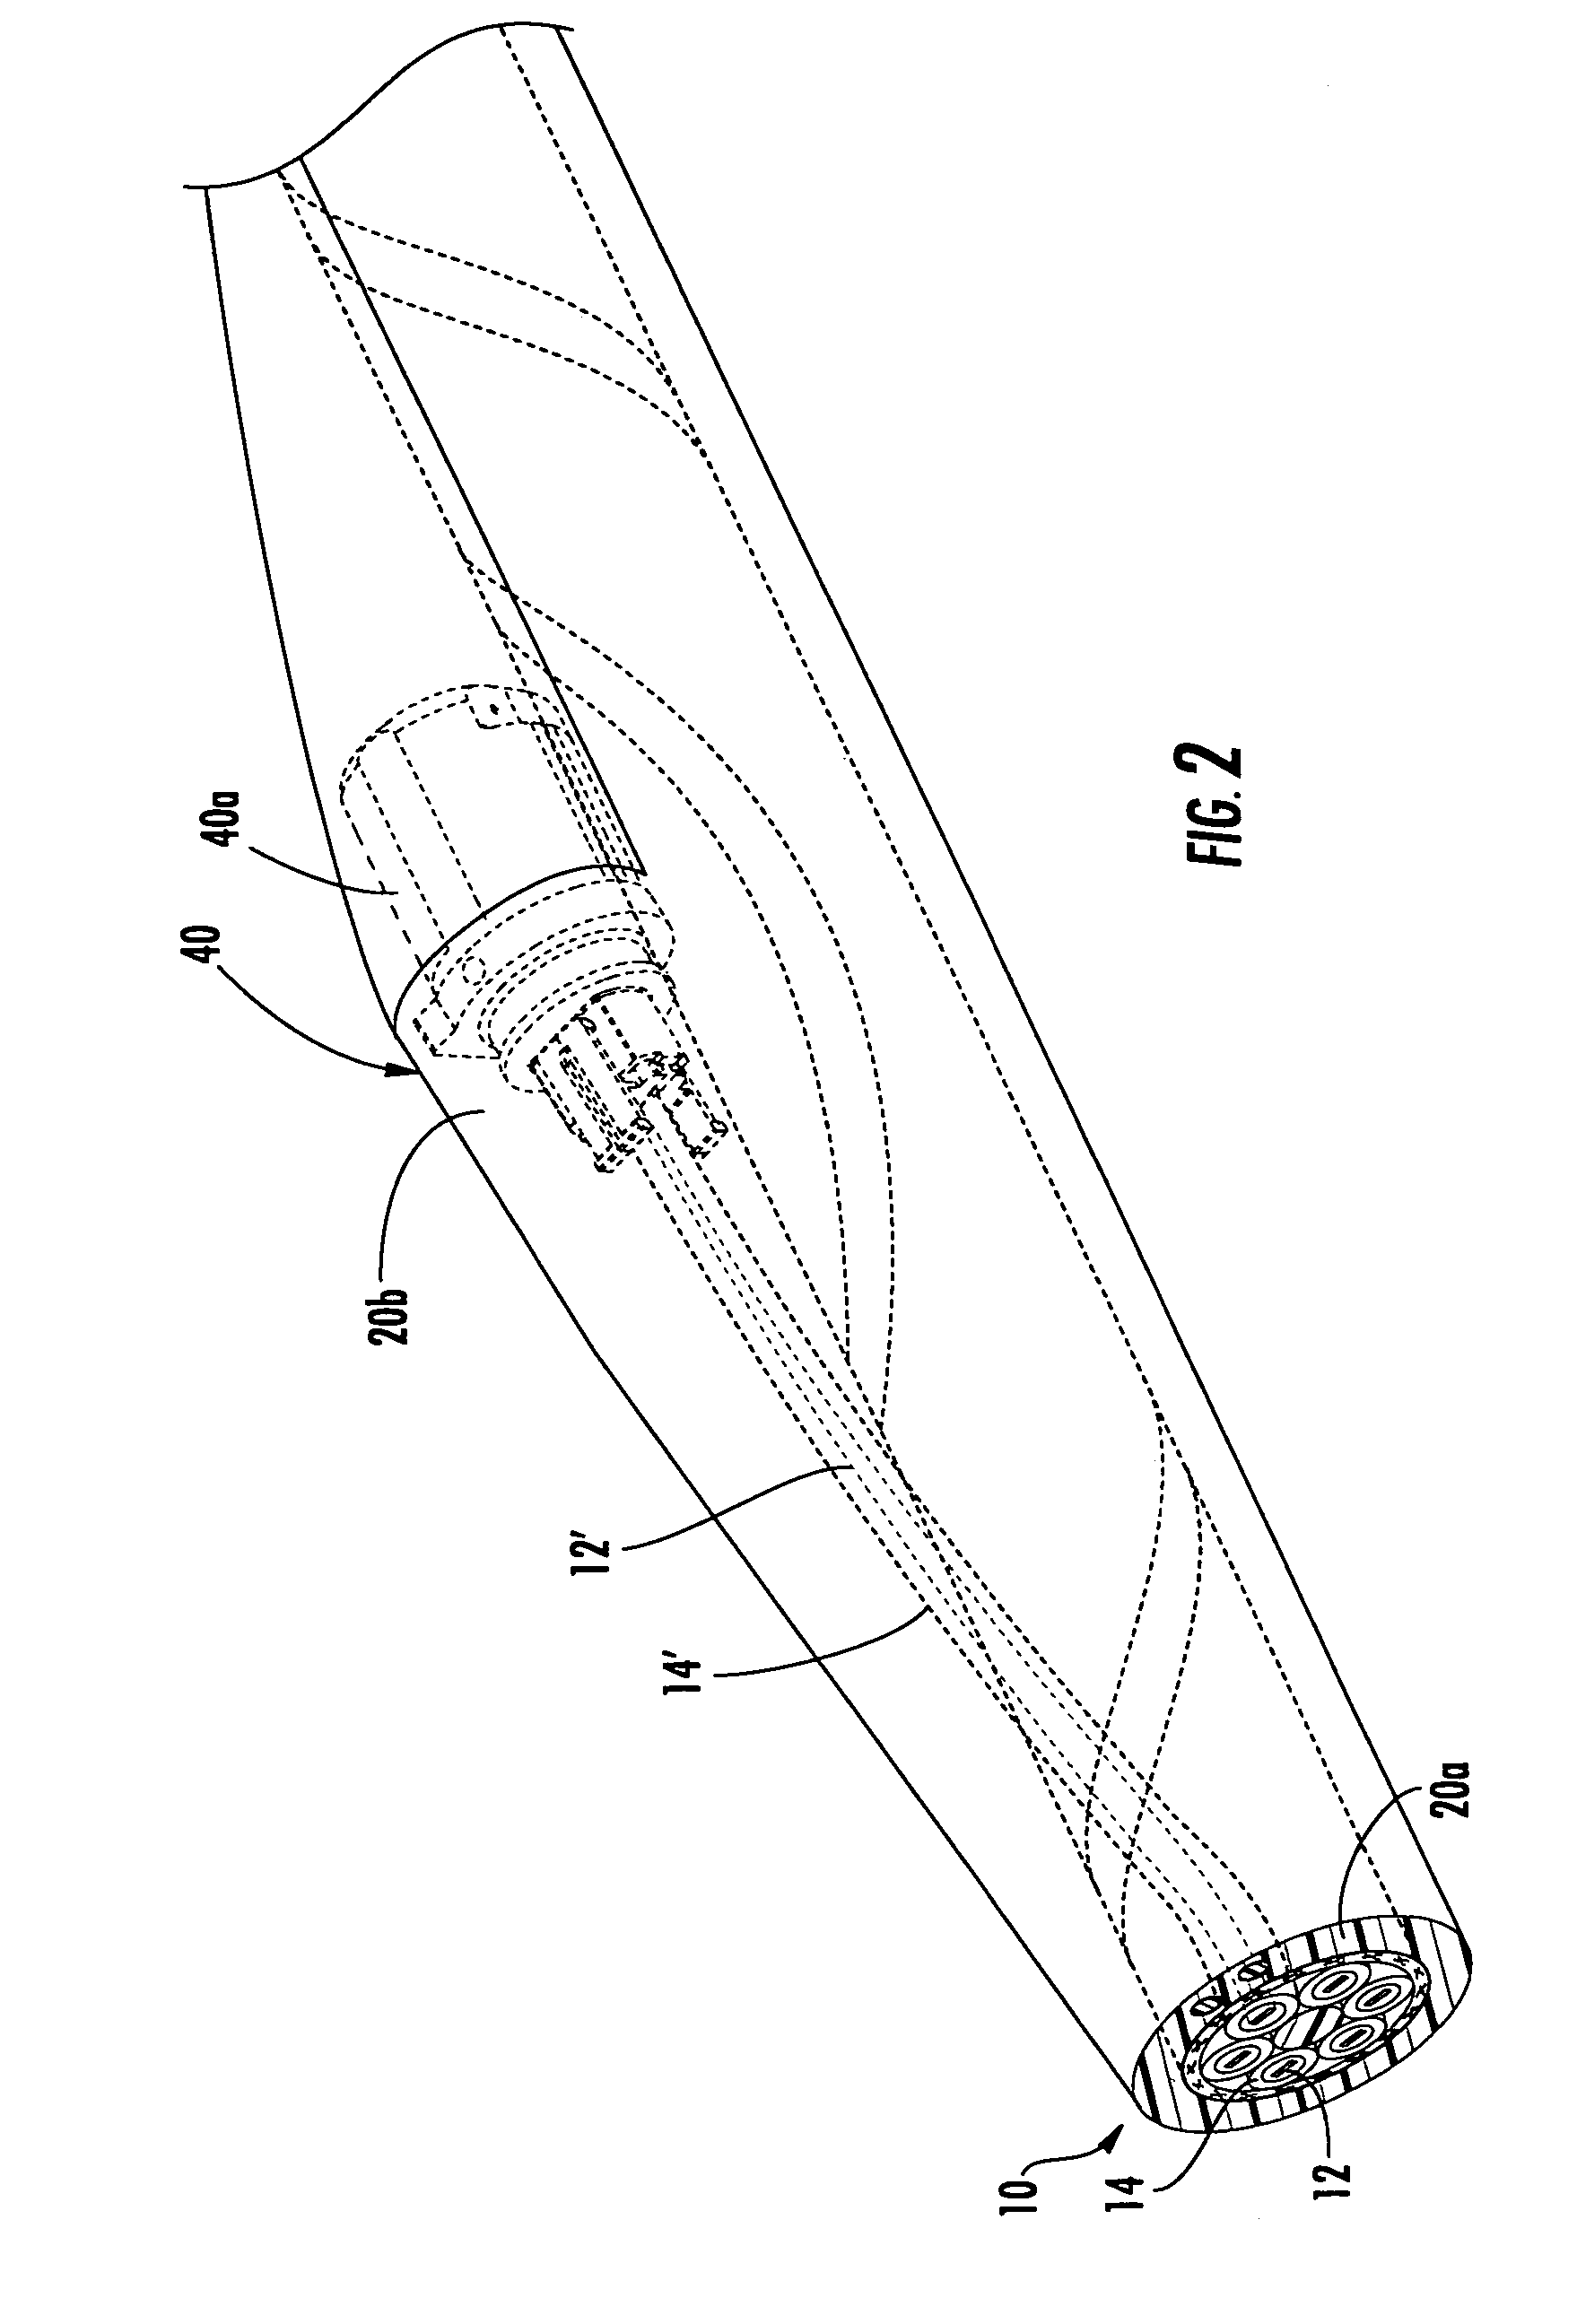 Fiber optic cables having at least one tether optical fiber